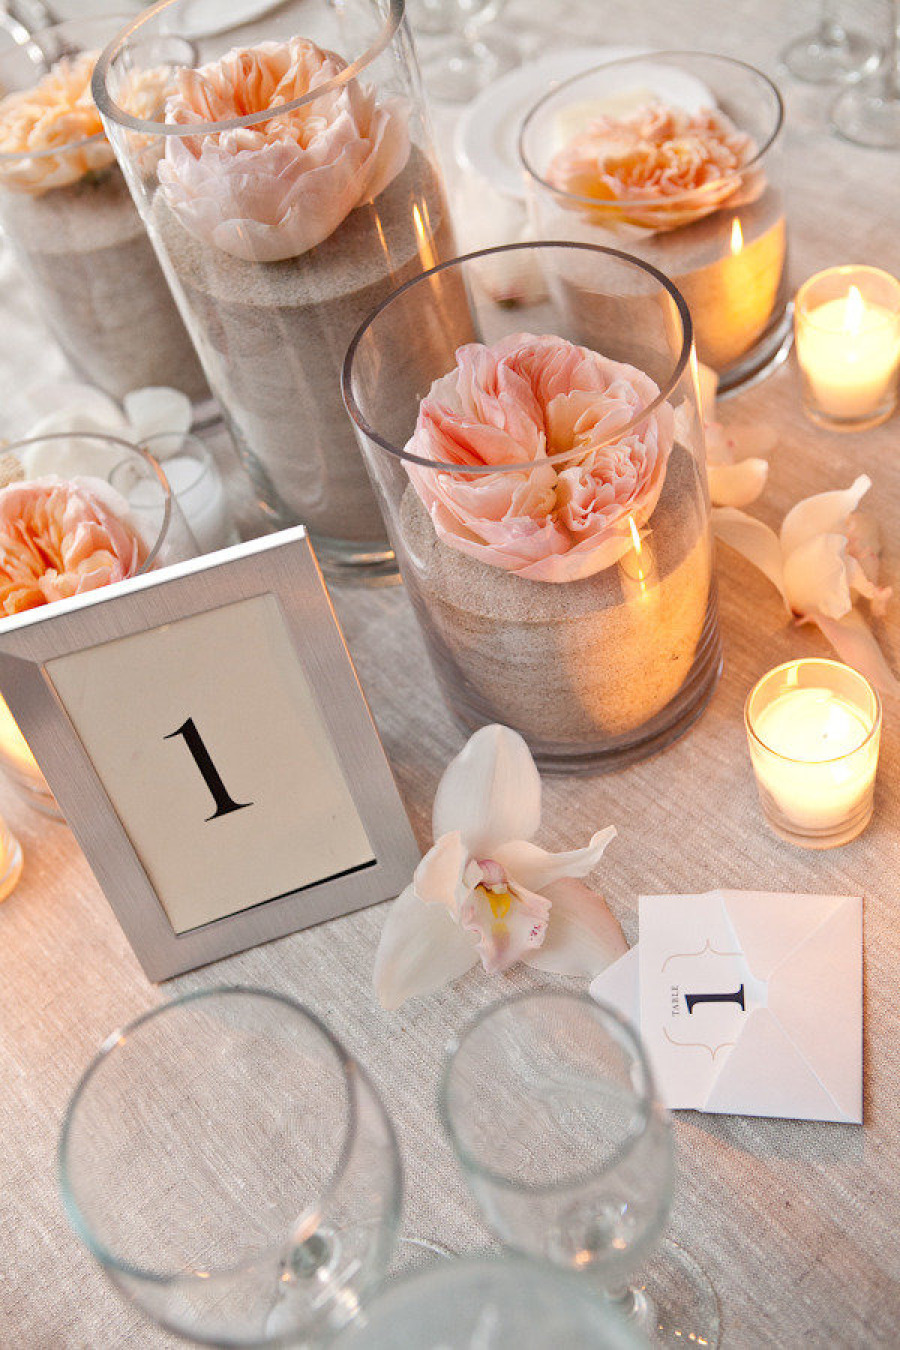 sand in votive candle holders | photo: tory williams | via decorate for beach wedding ideas from emmalinebride.com